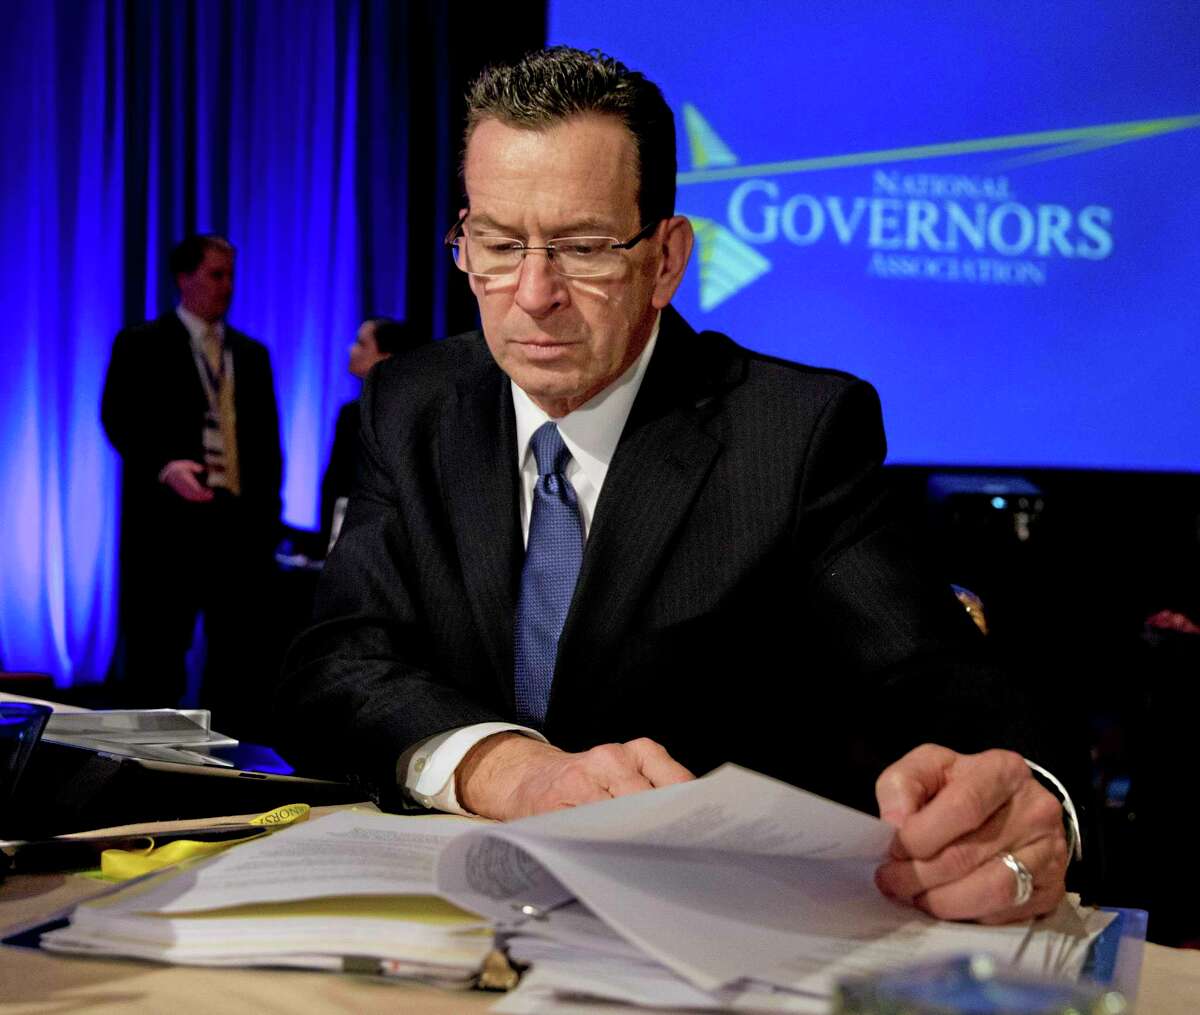 Connecticut Gov. Dannel P. Malloy reads documents during the National Governors Association 2013 Winter Meeting in Washington on Feb. 23, 2013.